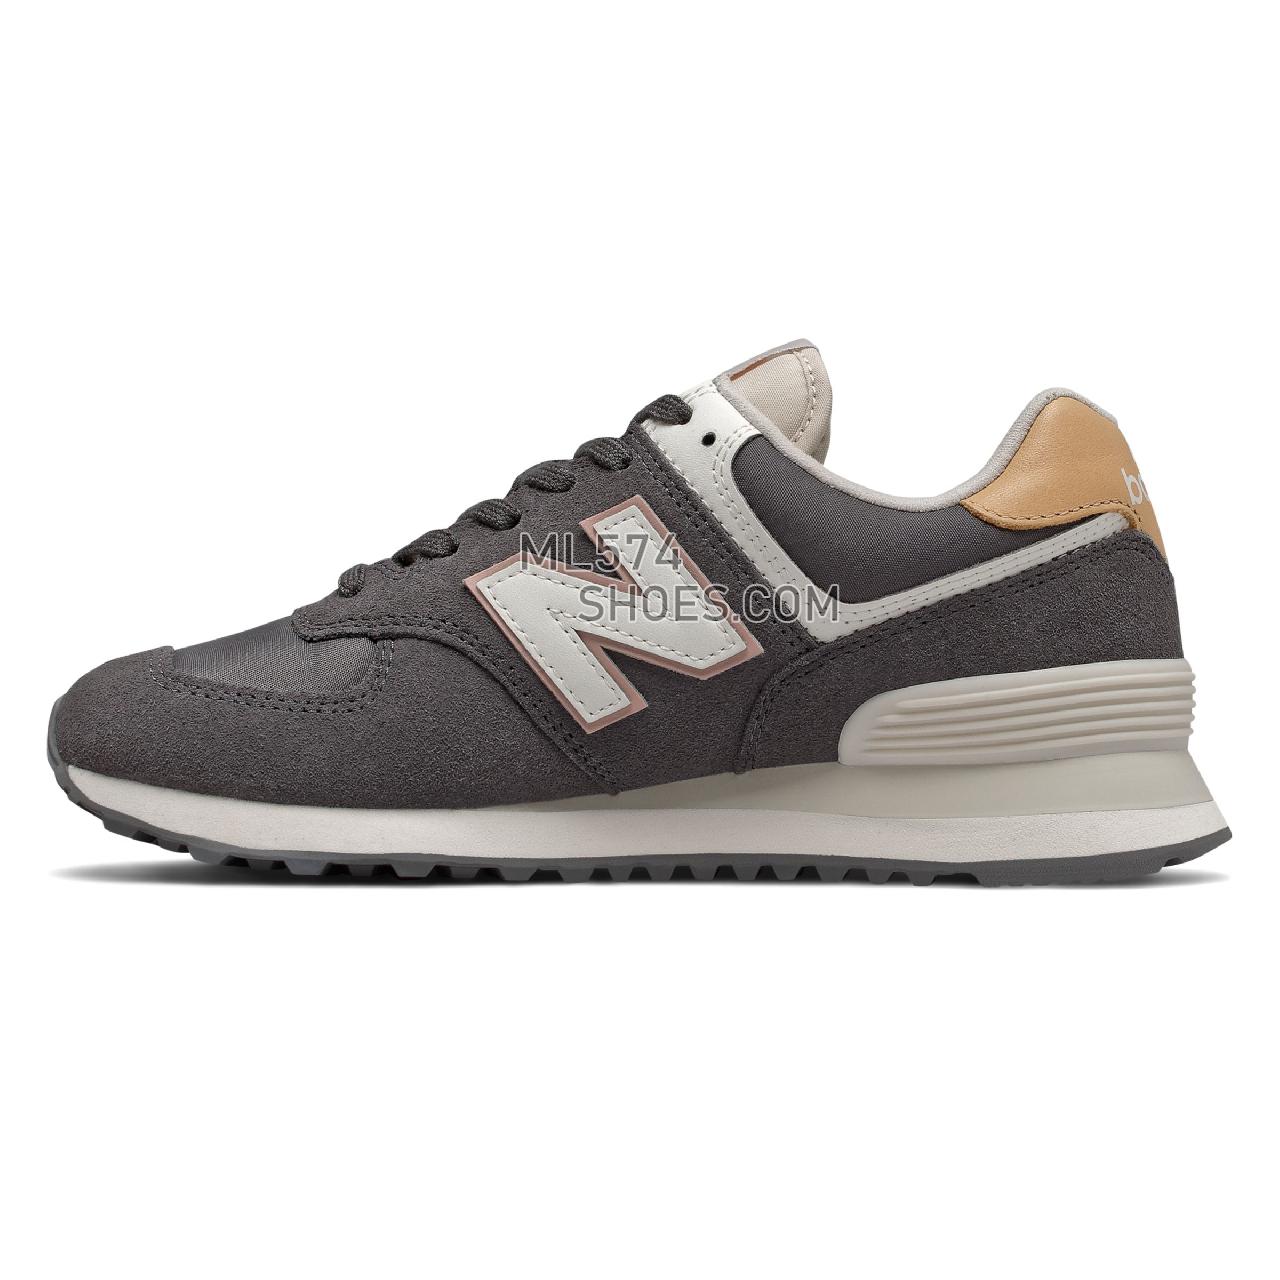 New Balance 574 - Women's Classic Sneakers - Magnet with Castlerock - WL574SYP